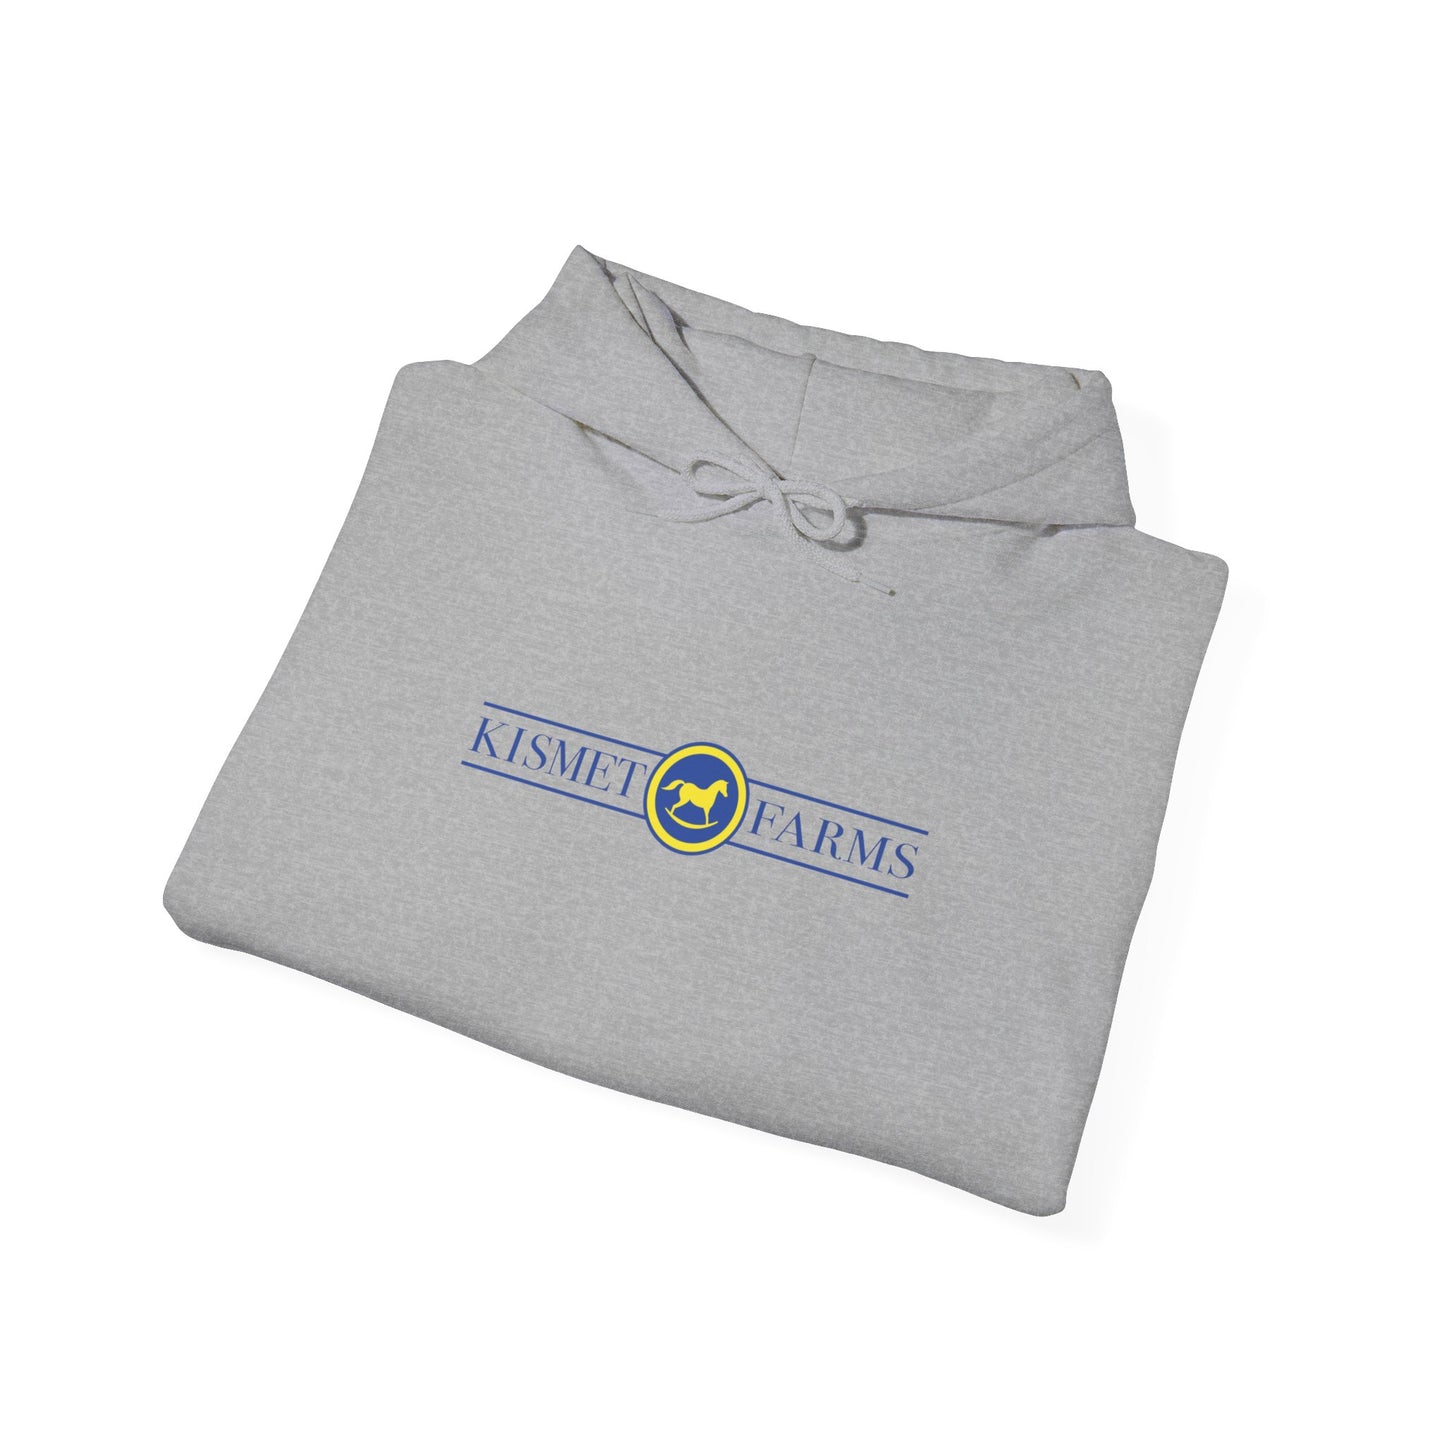 Competition Team Hoodie